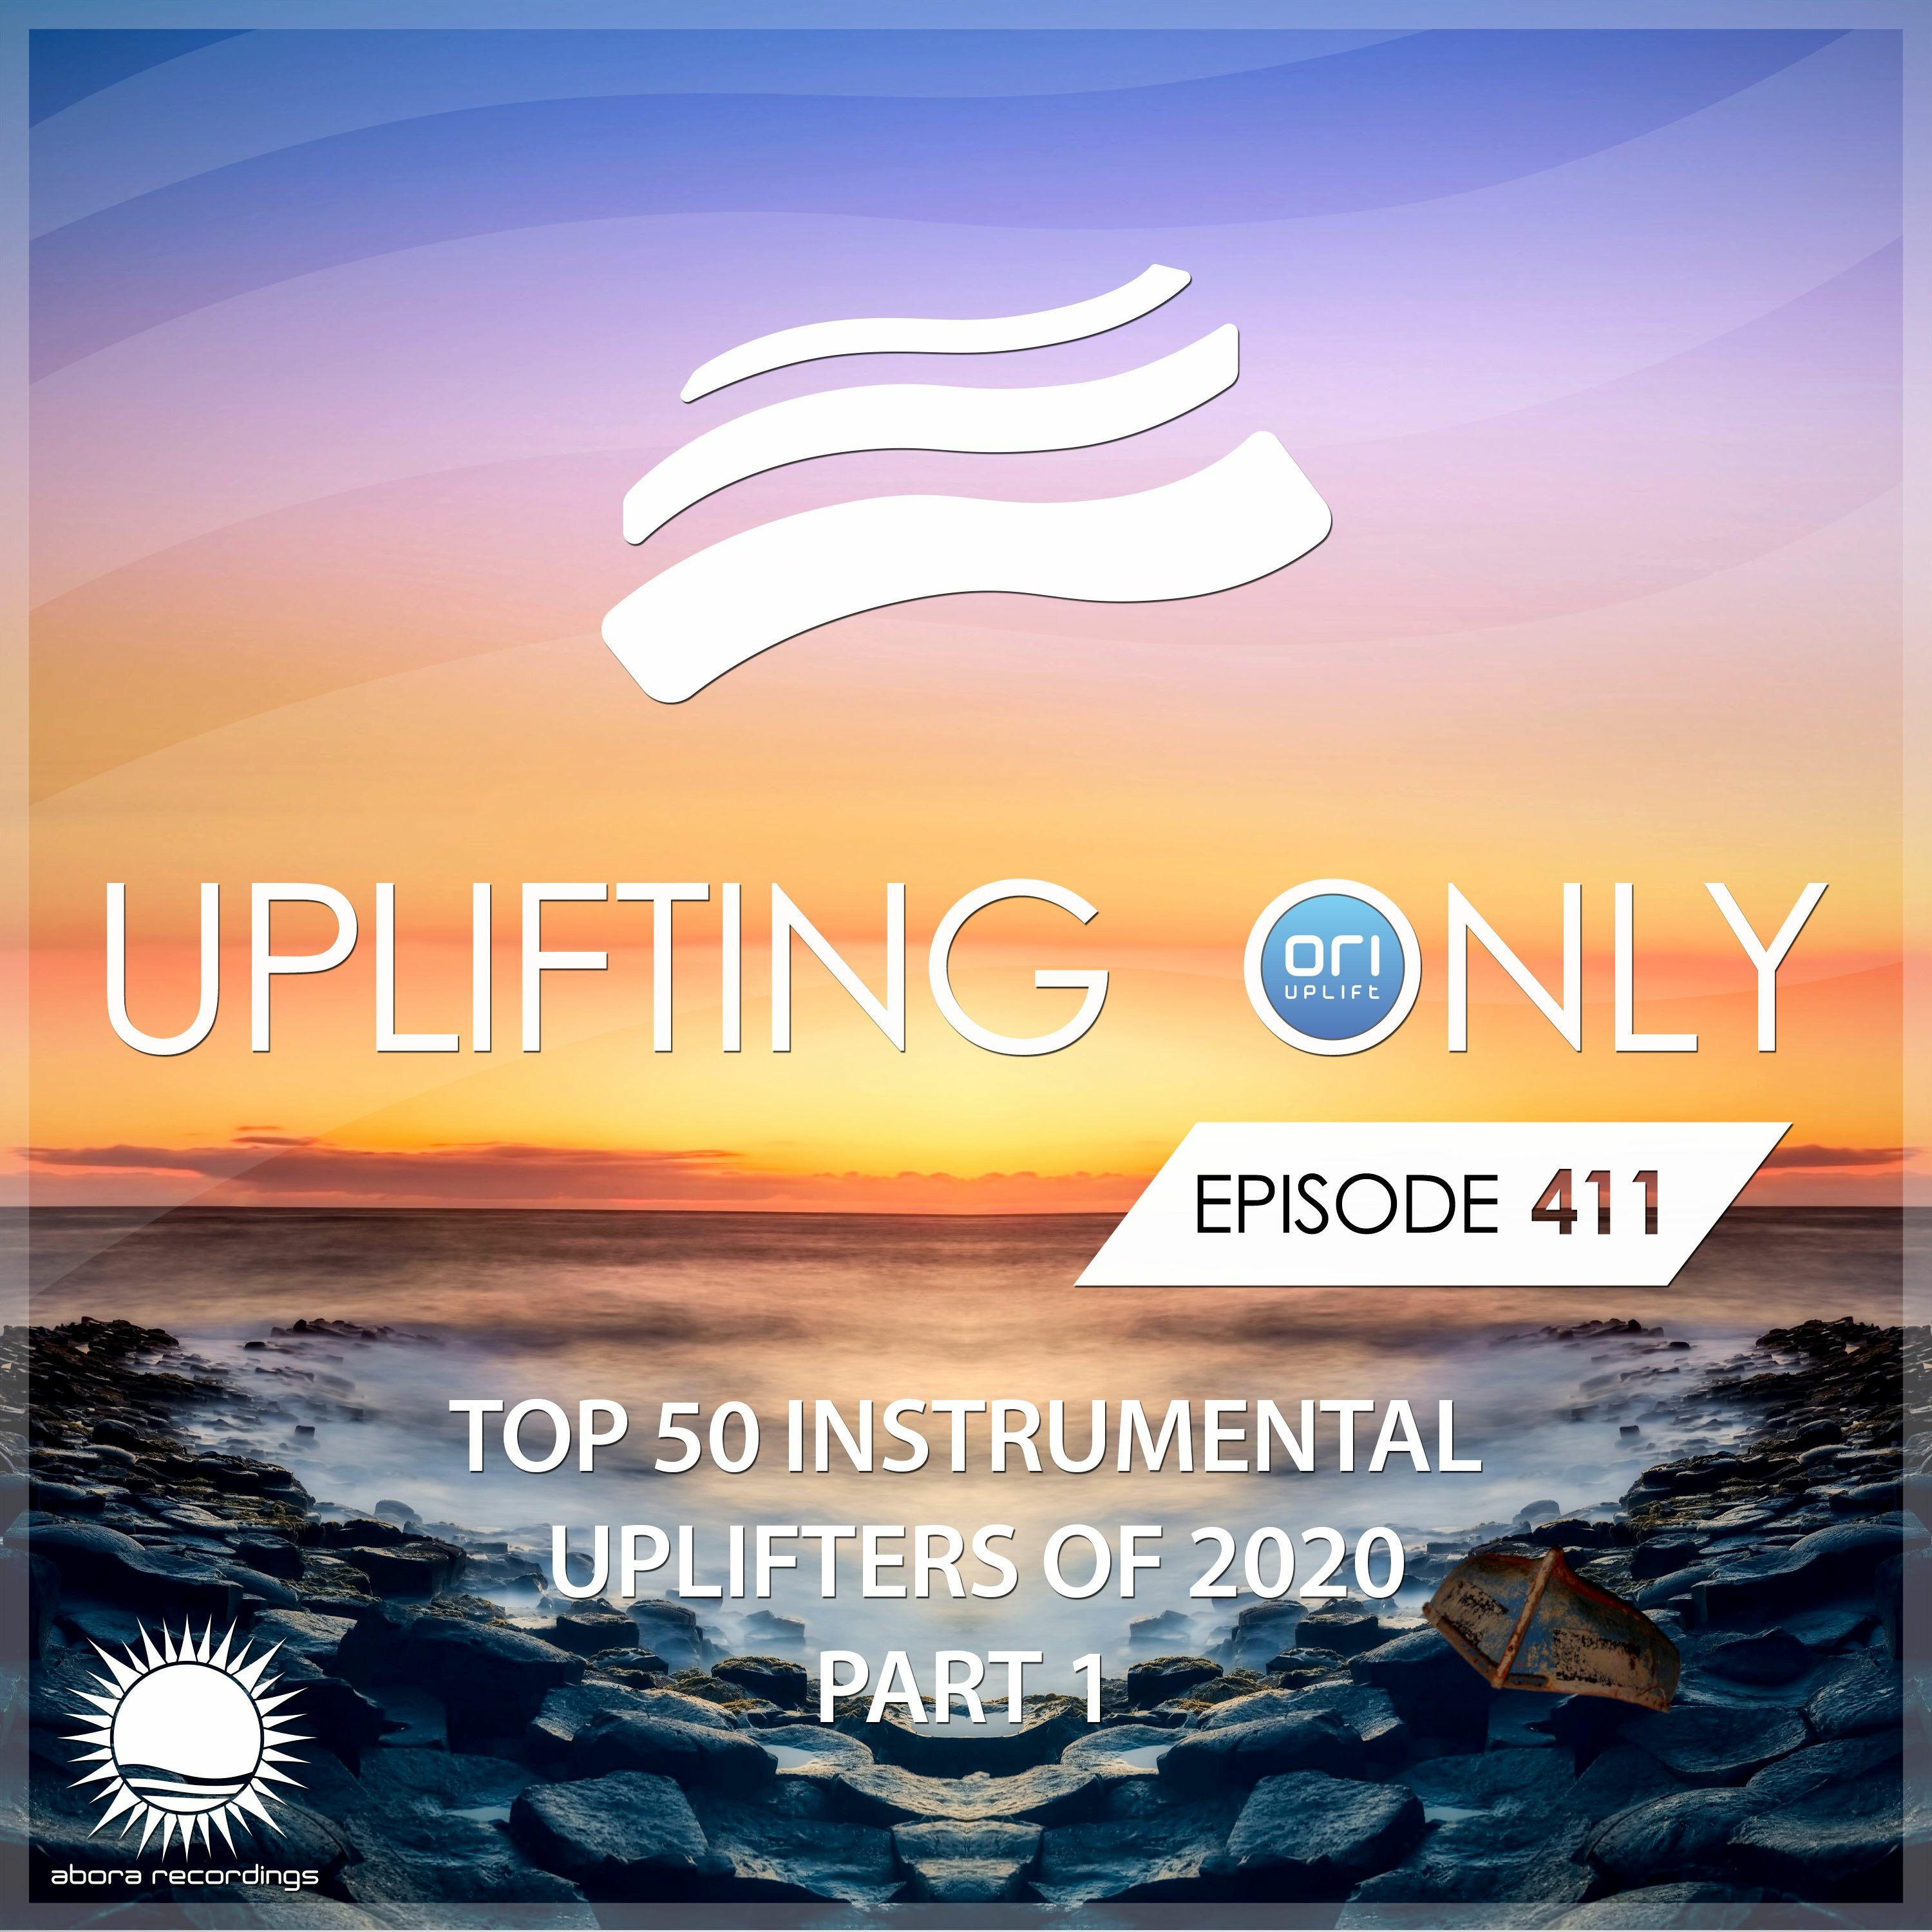 Uplifting Only 411 (Dec 24, 2020) (Ori’s Top 50 Instrumental Uplifters of 2020 - Part 1)